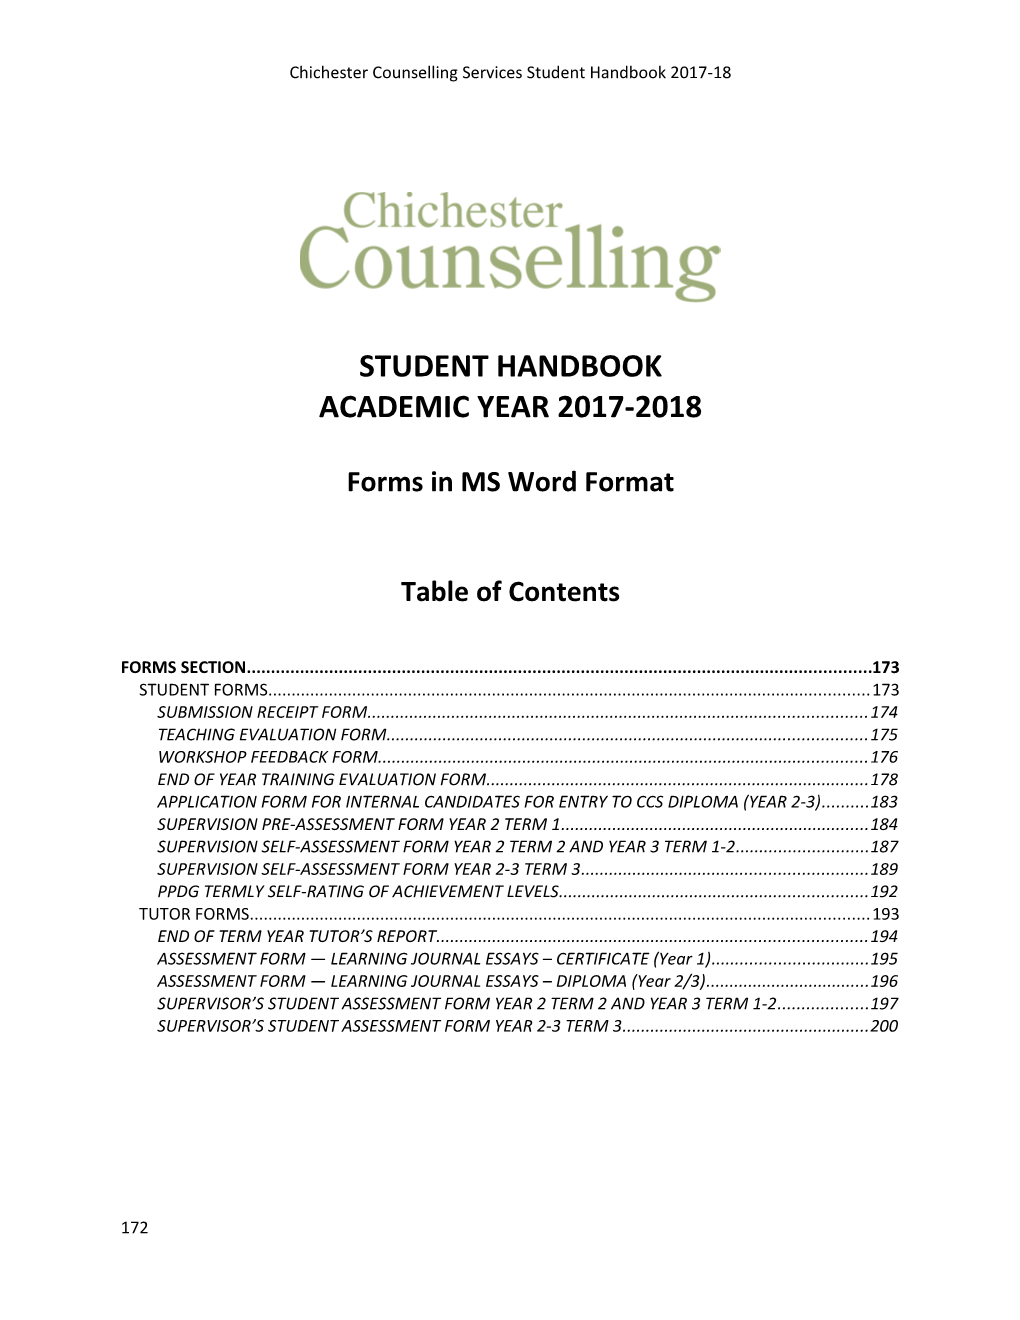 Chichester Counselling Services Student Handbook 2017-18